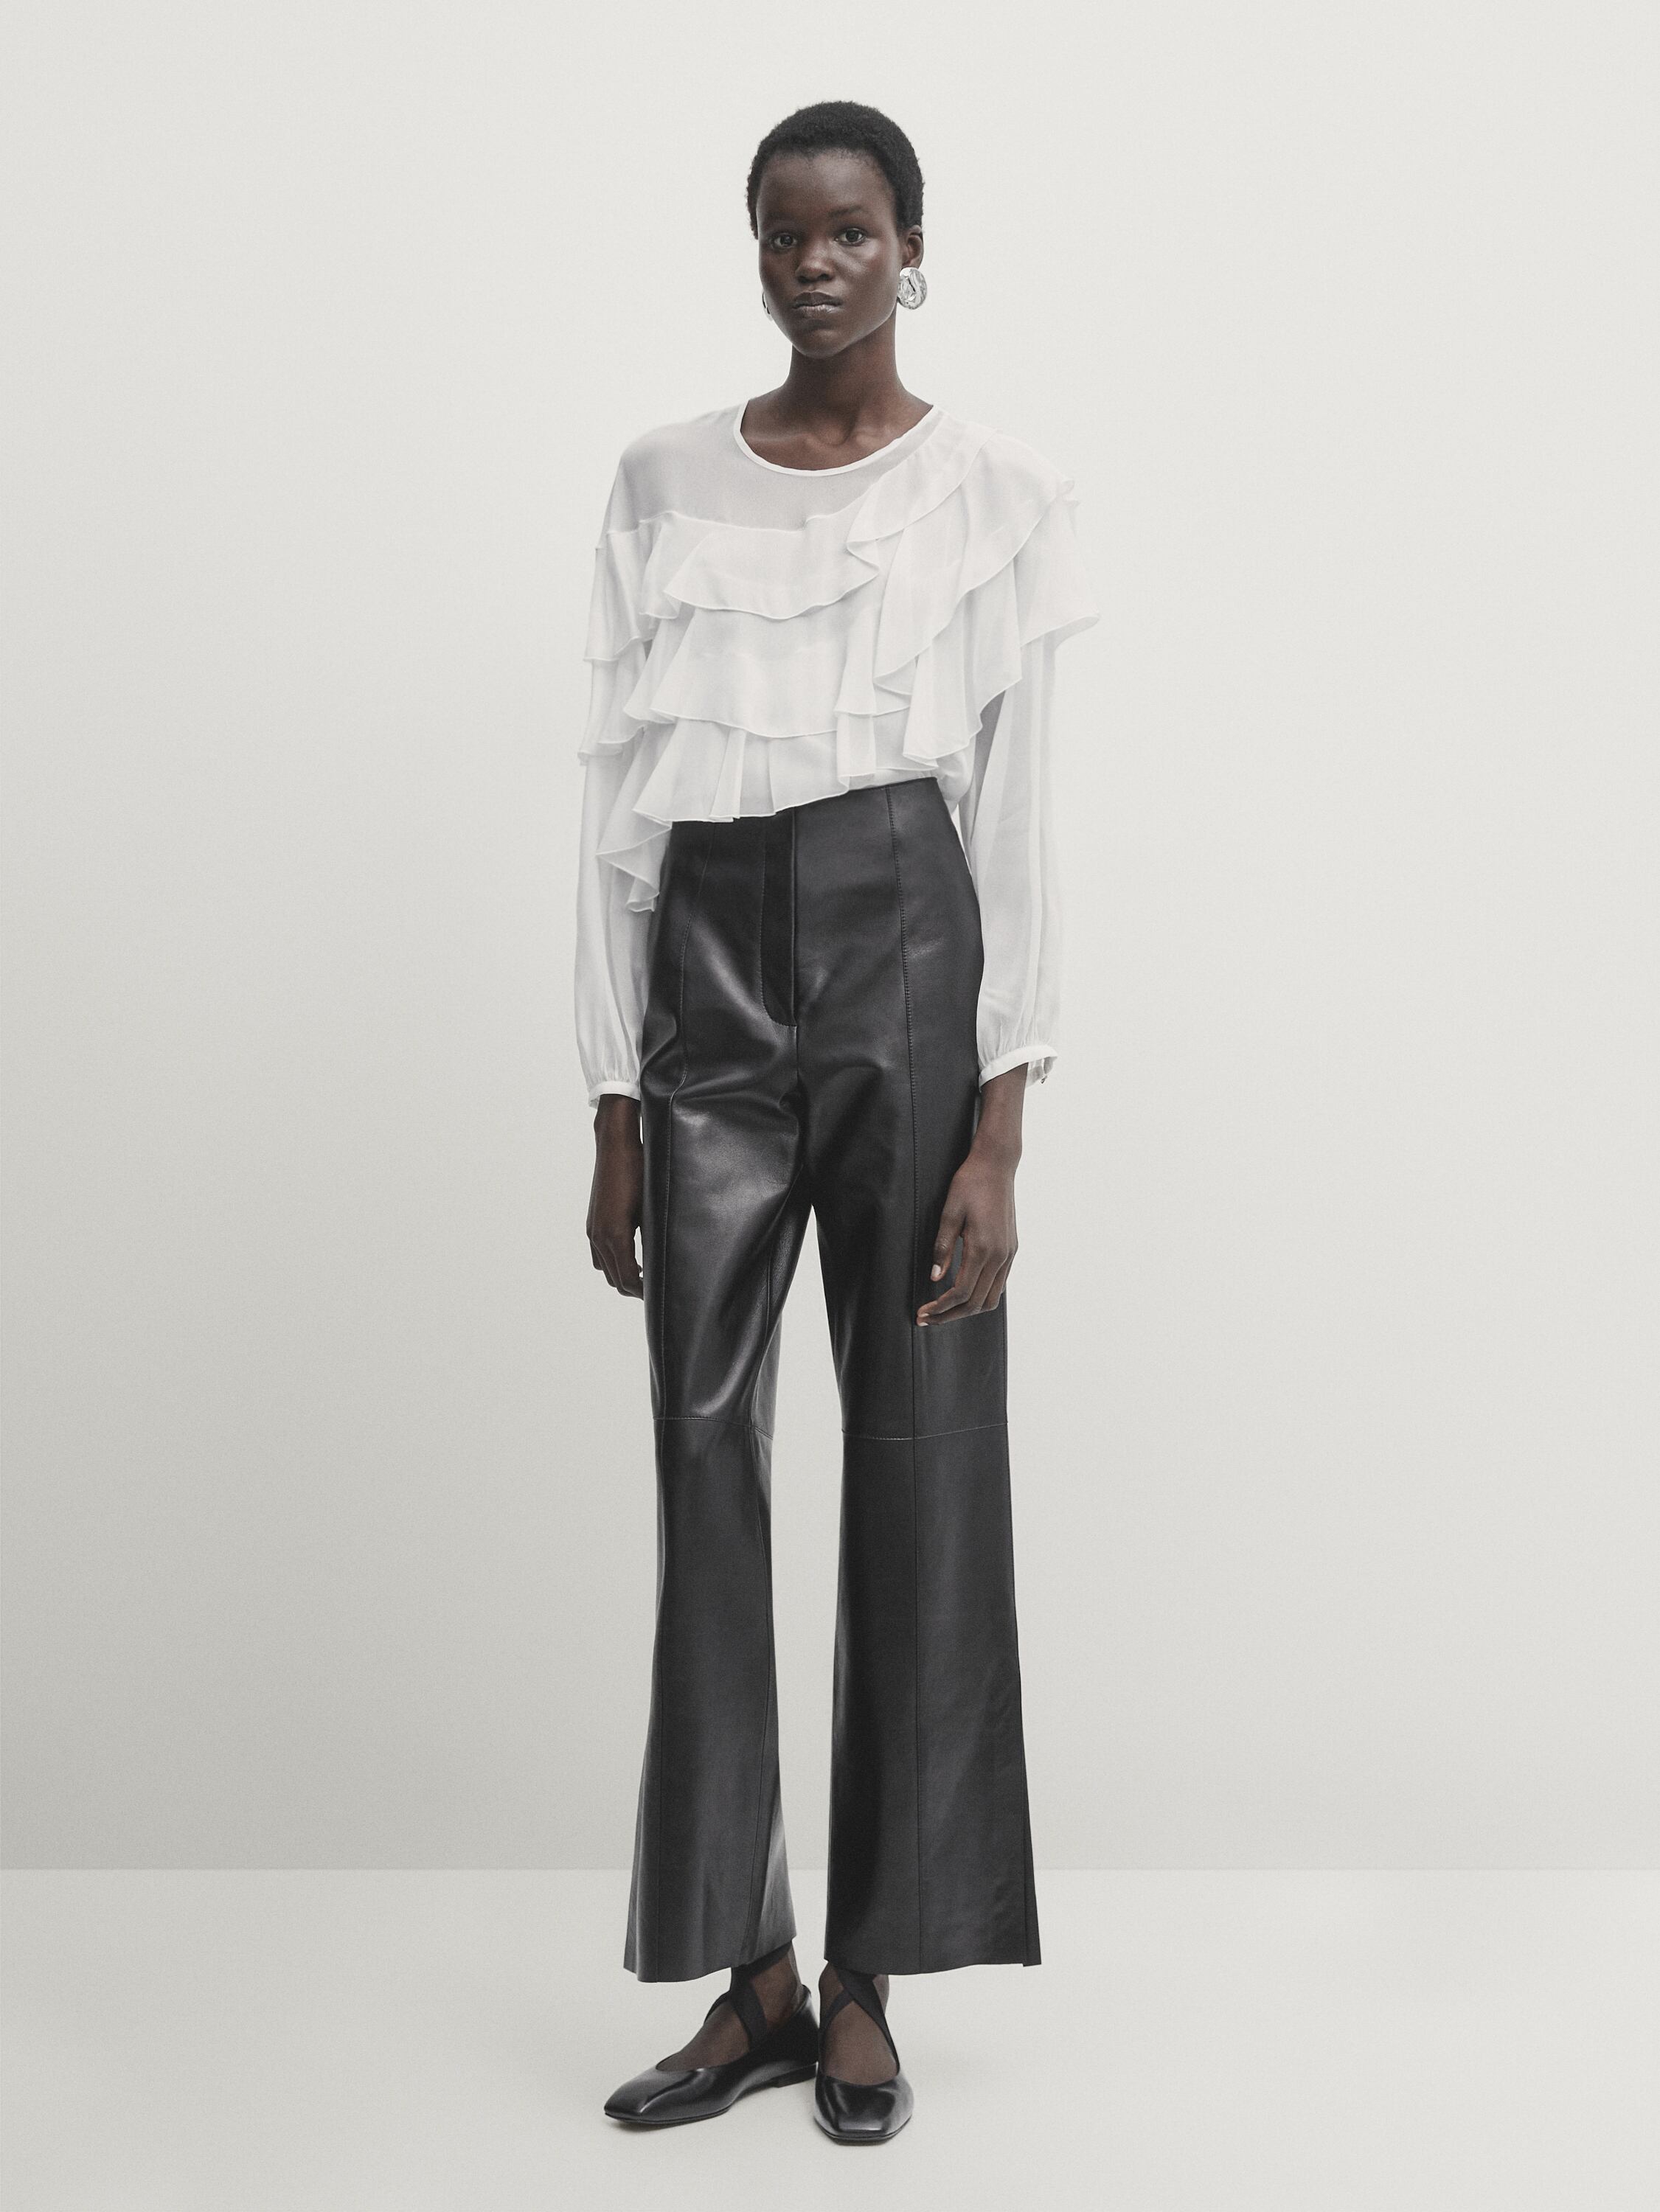 Flowing shirt with ruffled detail - Studio